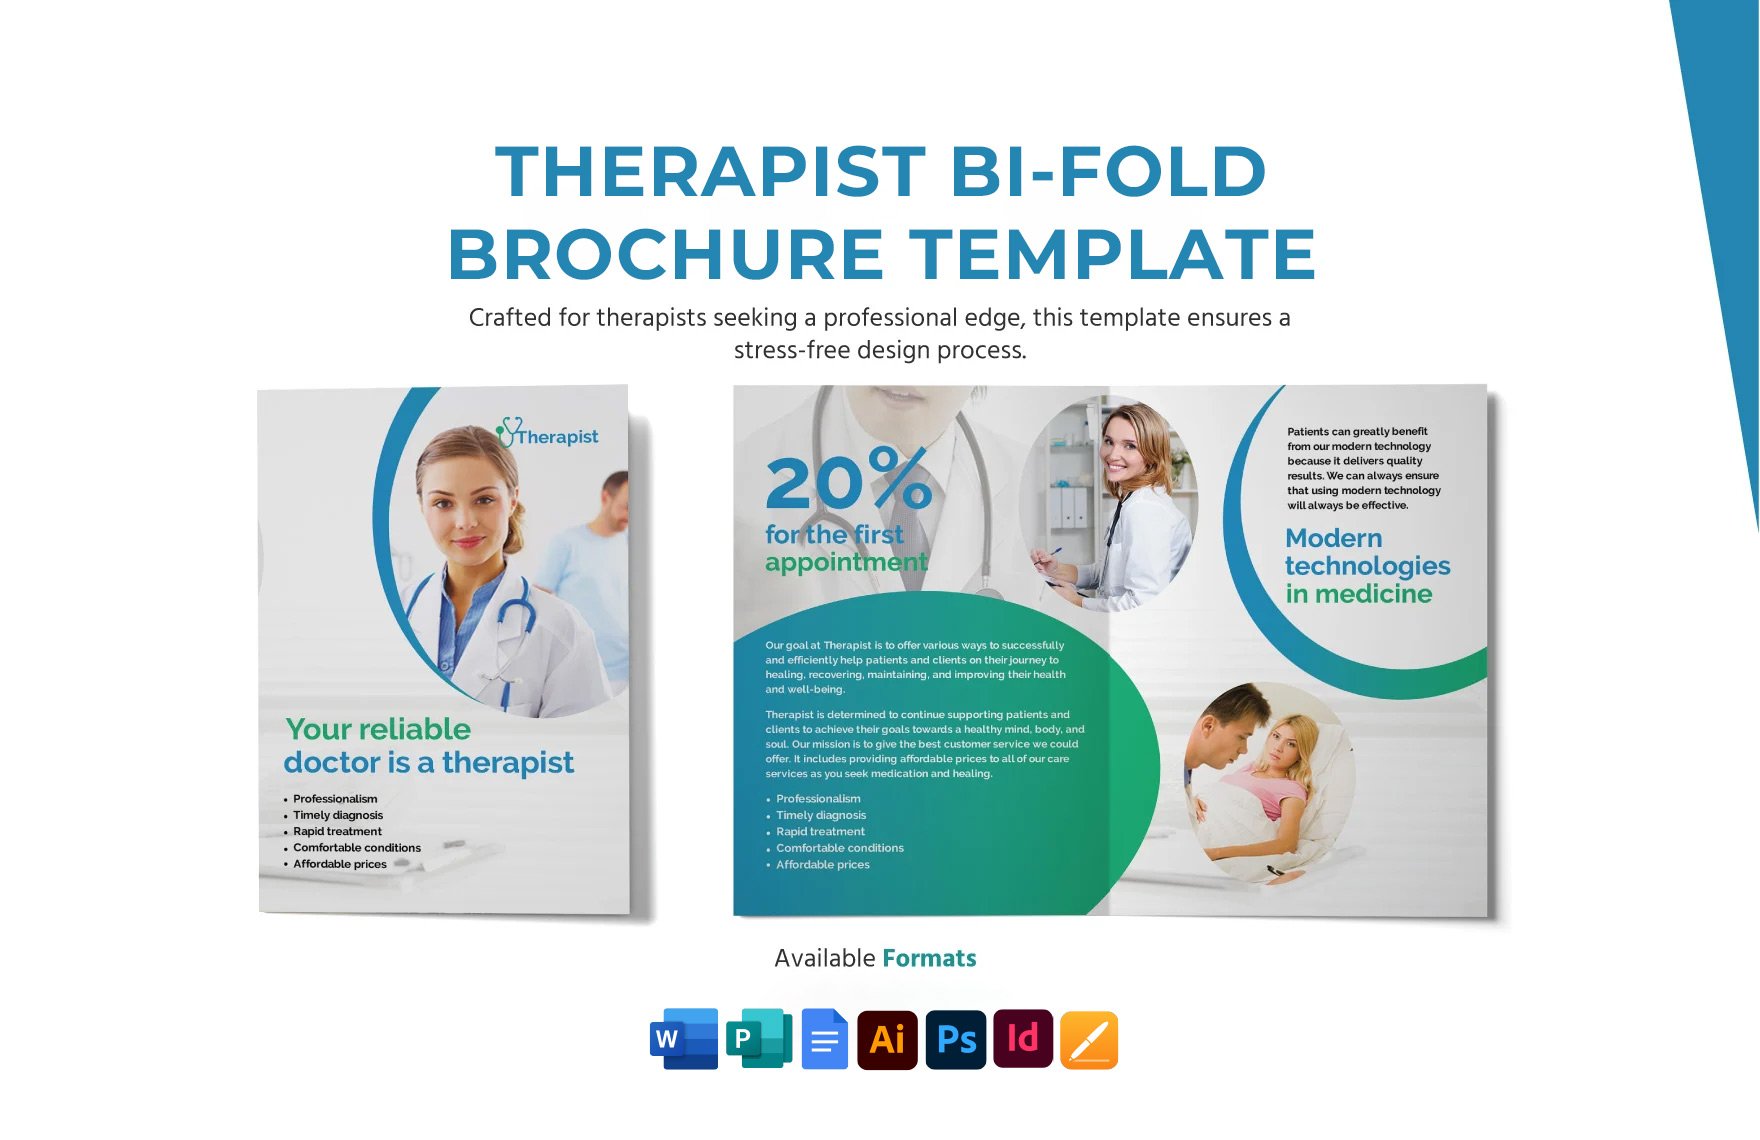 Free Therapist Bi-Fold Brochure Template in Word, Google Docs, Illustrator, PSD, Apple Pages, Publisher, InDesign